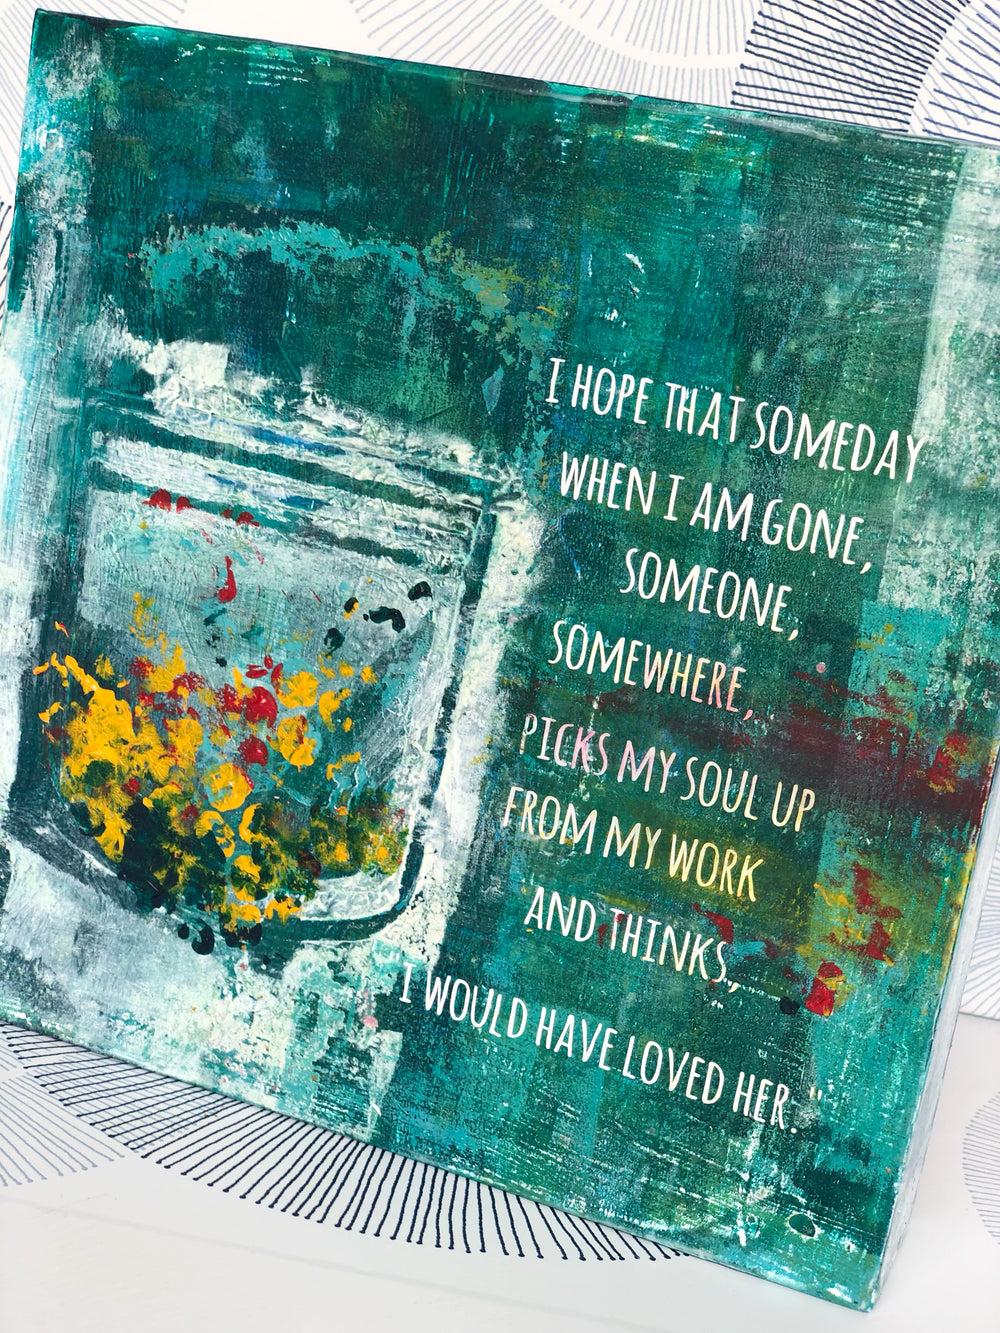 a painted wooden art piece with the words, "I hope that someday when i am gone, someone, somewhere, picks my soul up from my work and thinks...i would have loved her." Paints and inks are shades of green and teal, with accents of white, yellow and red.